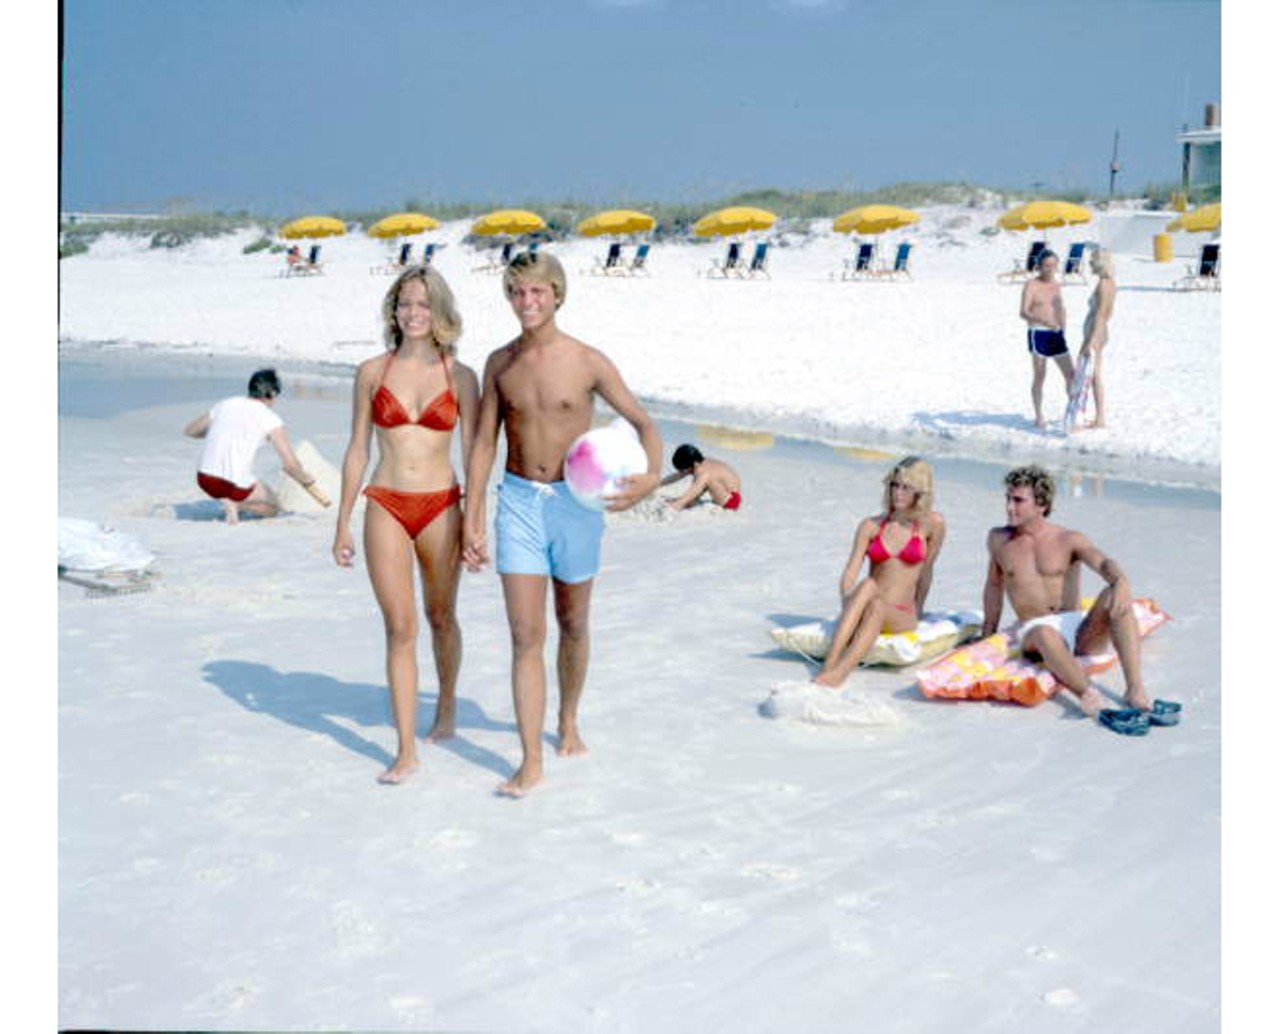 Teen dreams: 30 vintage pics of wholesome Florida teenagers